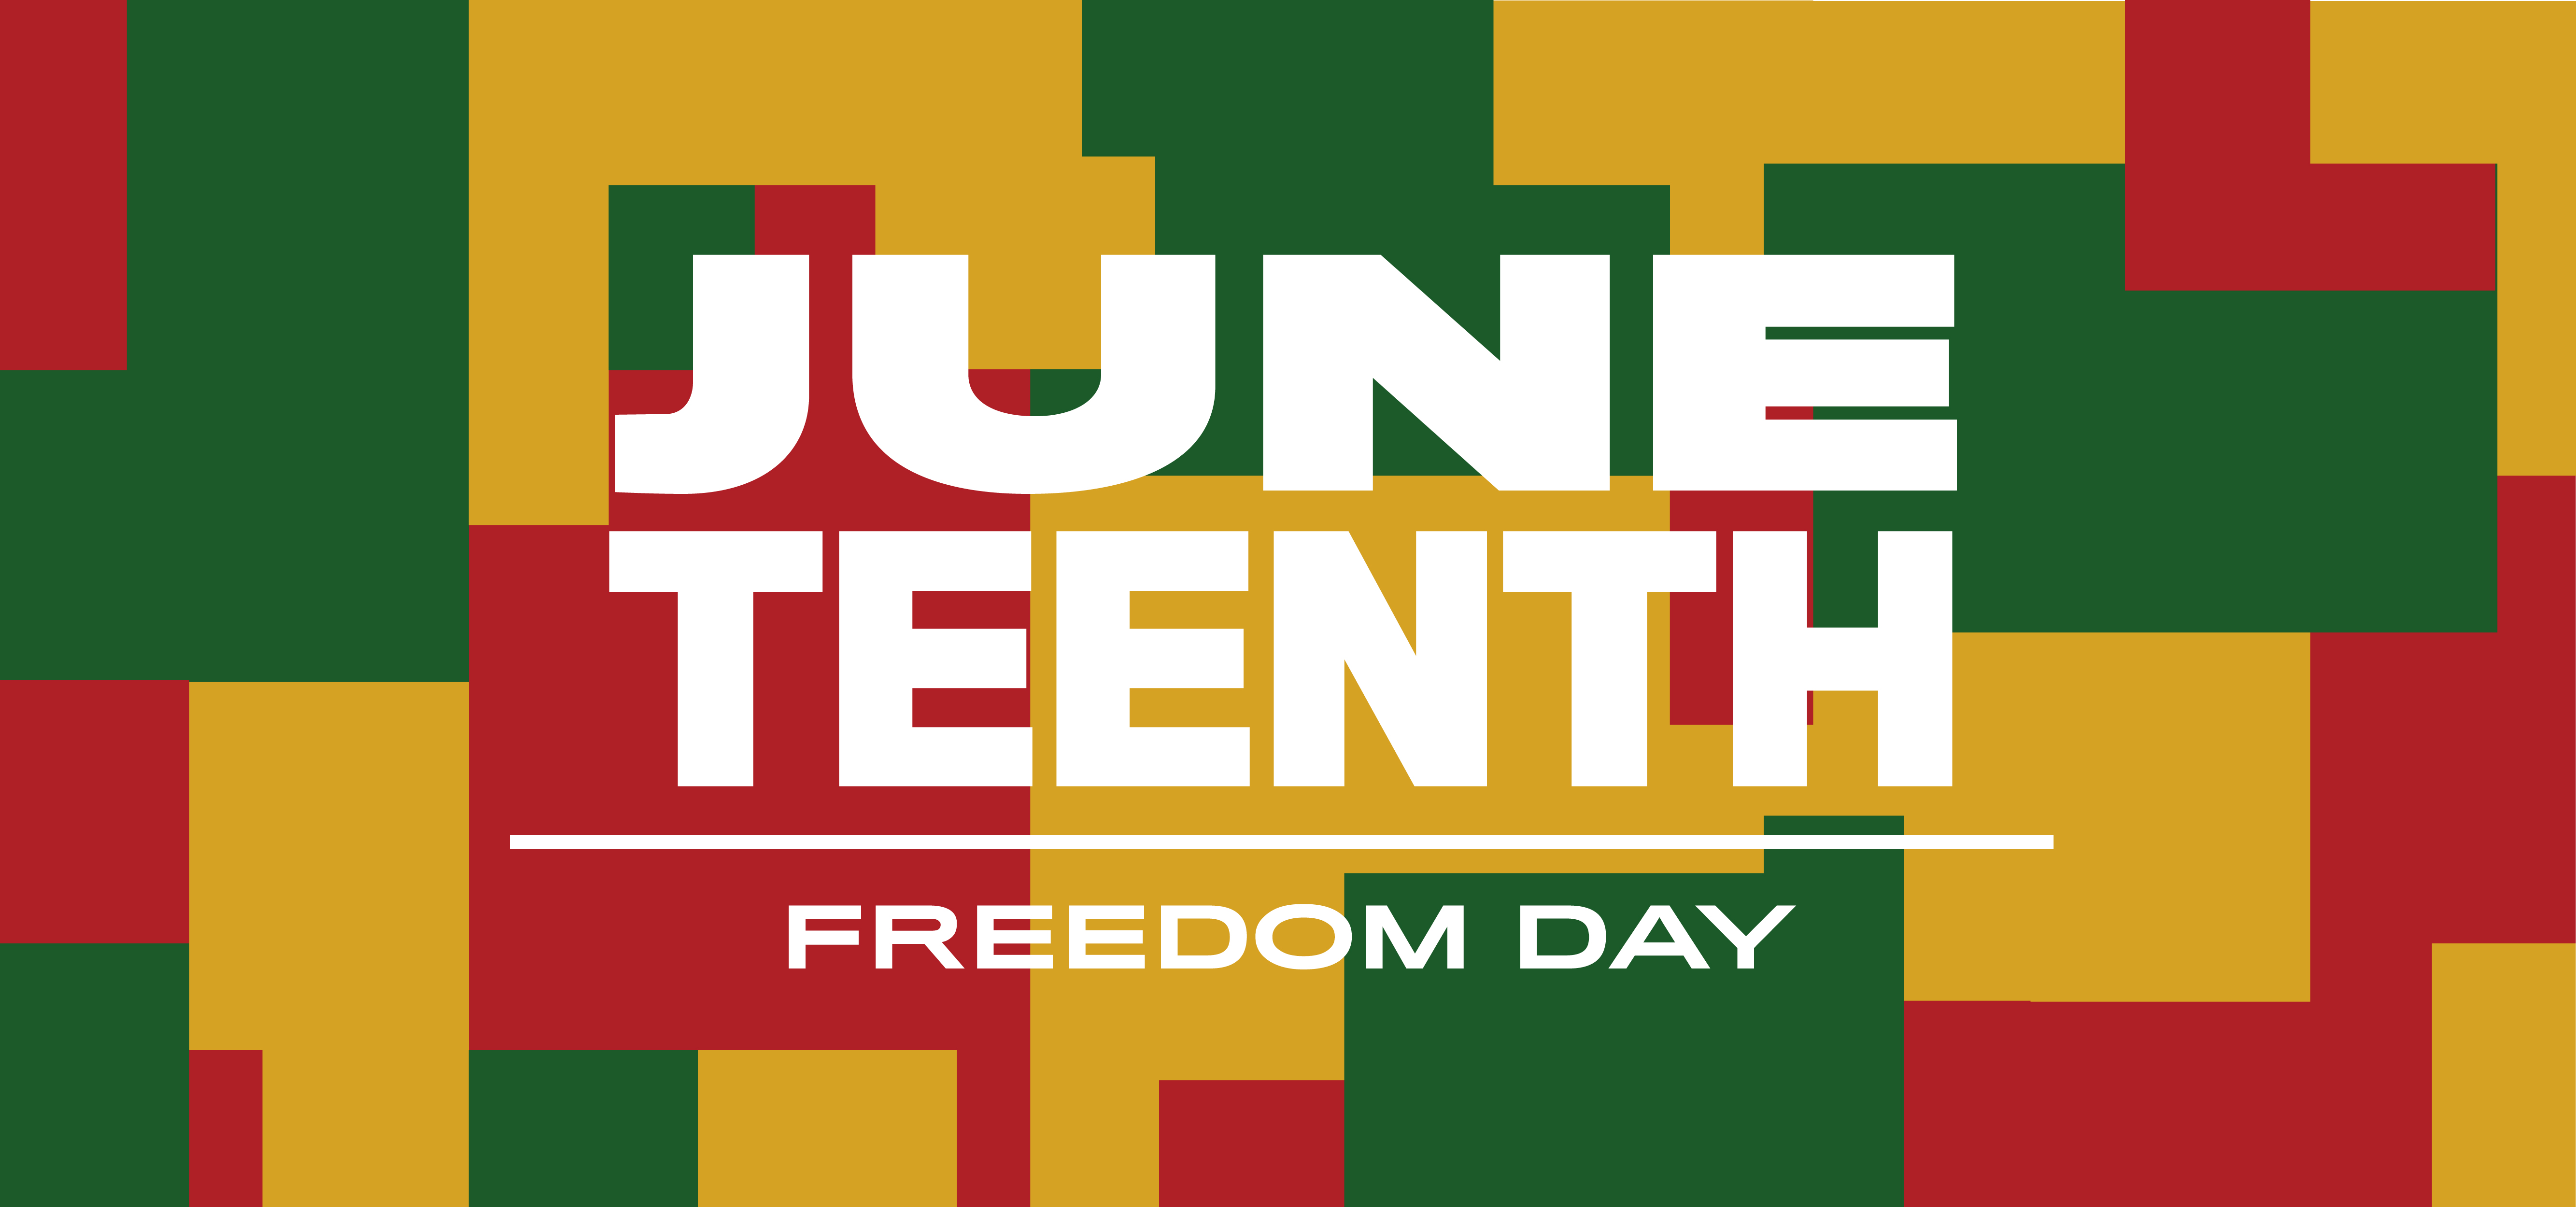 A banner image with the headline titles Juneteenth and Freedom Day over a background of abstract shapes in the colors red, green, and yellow. 